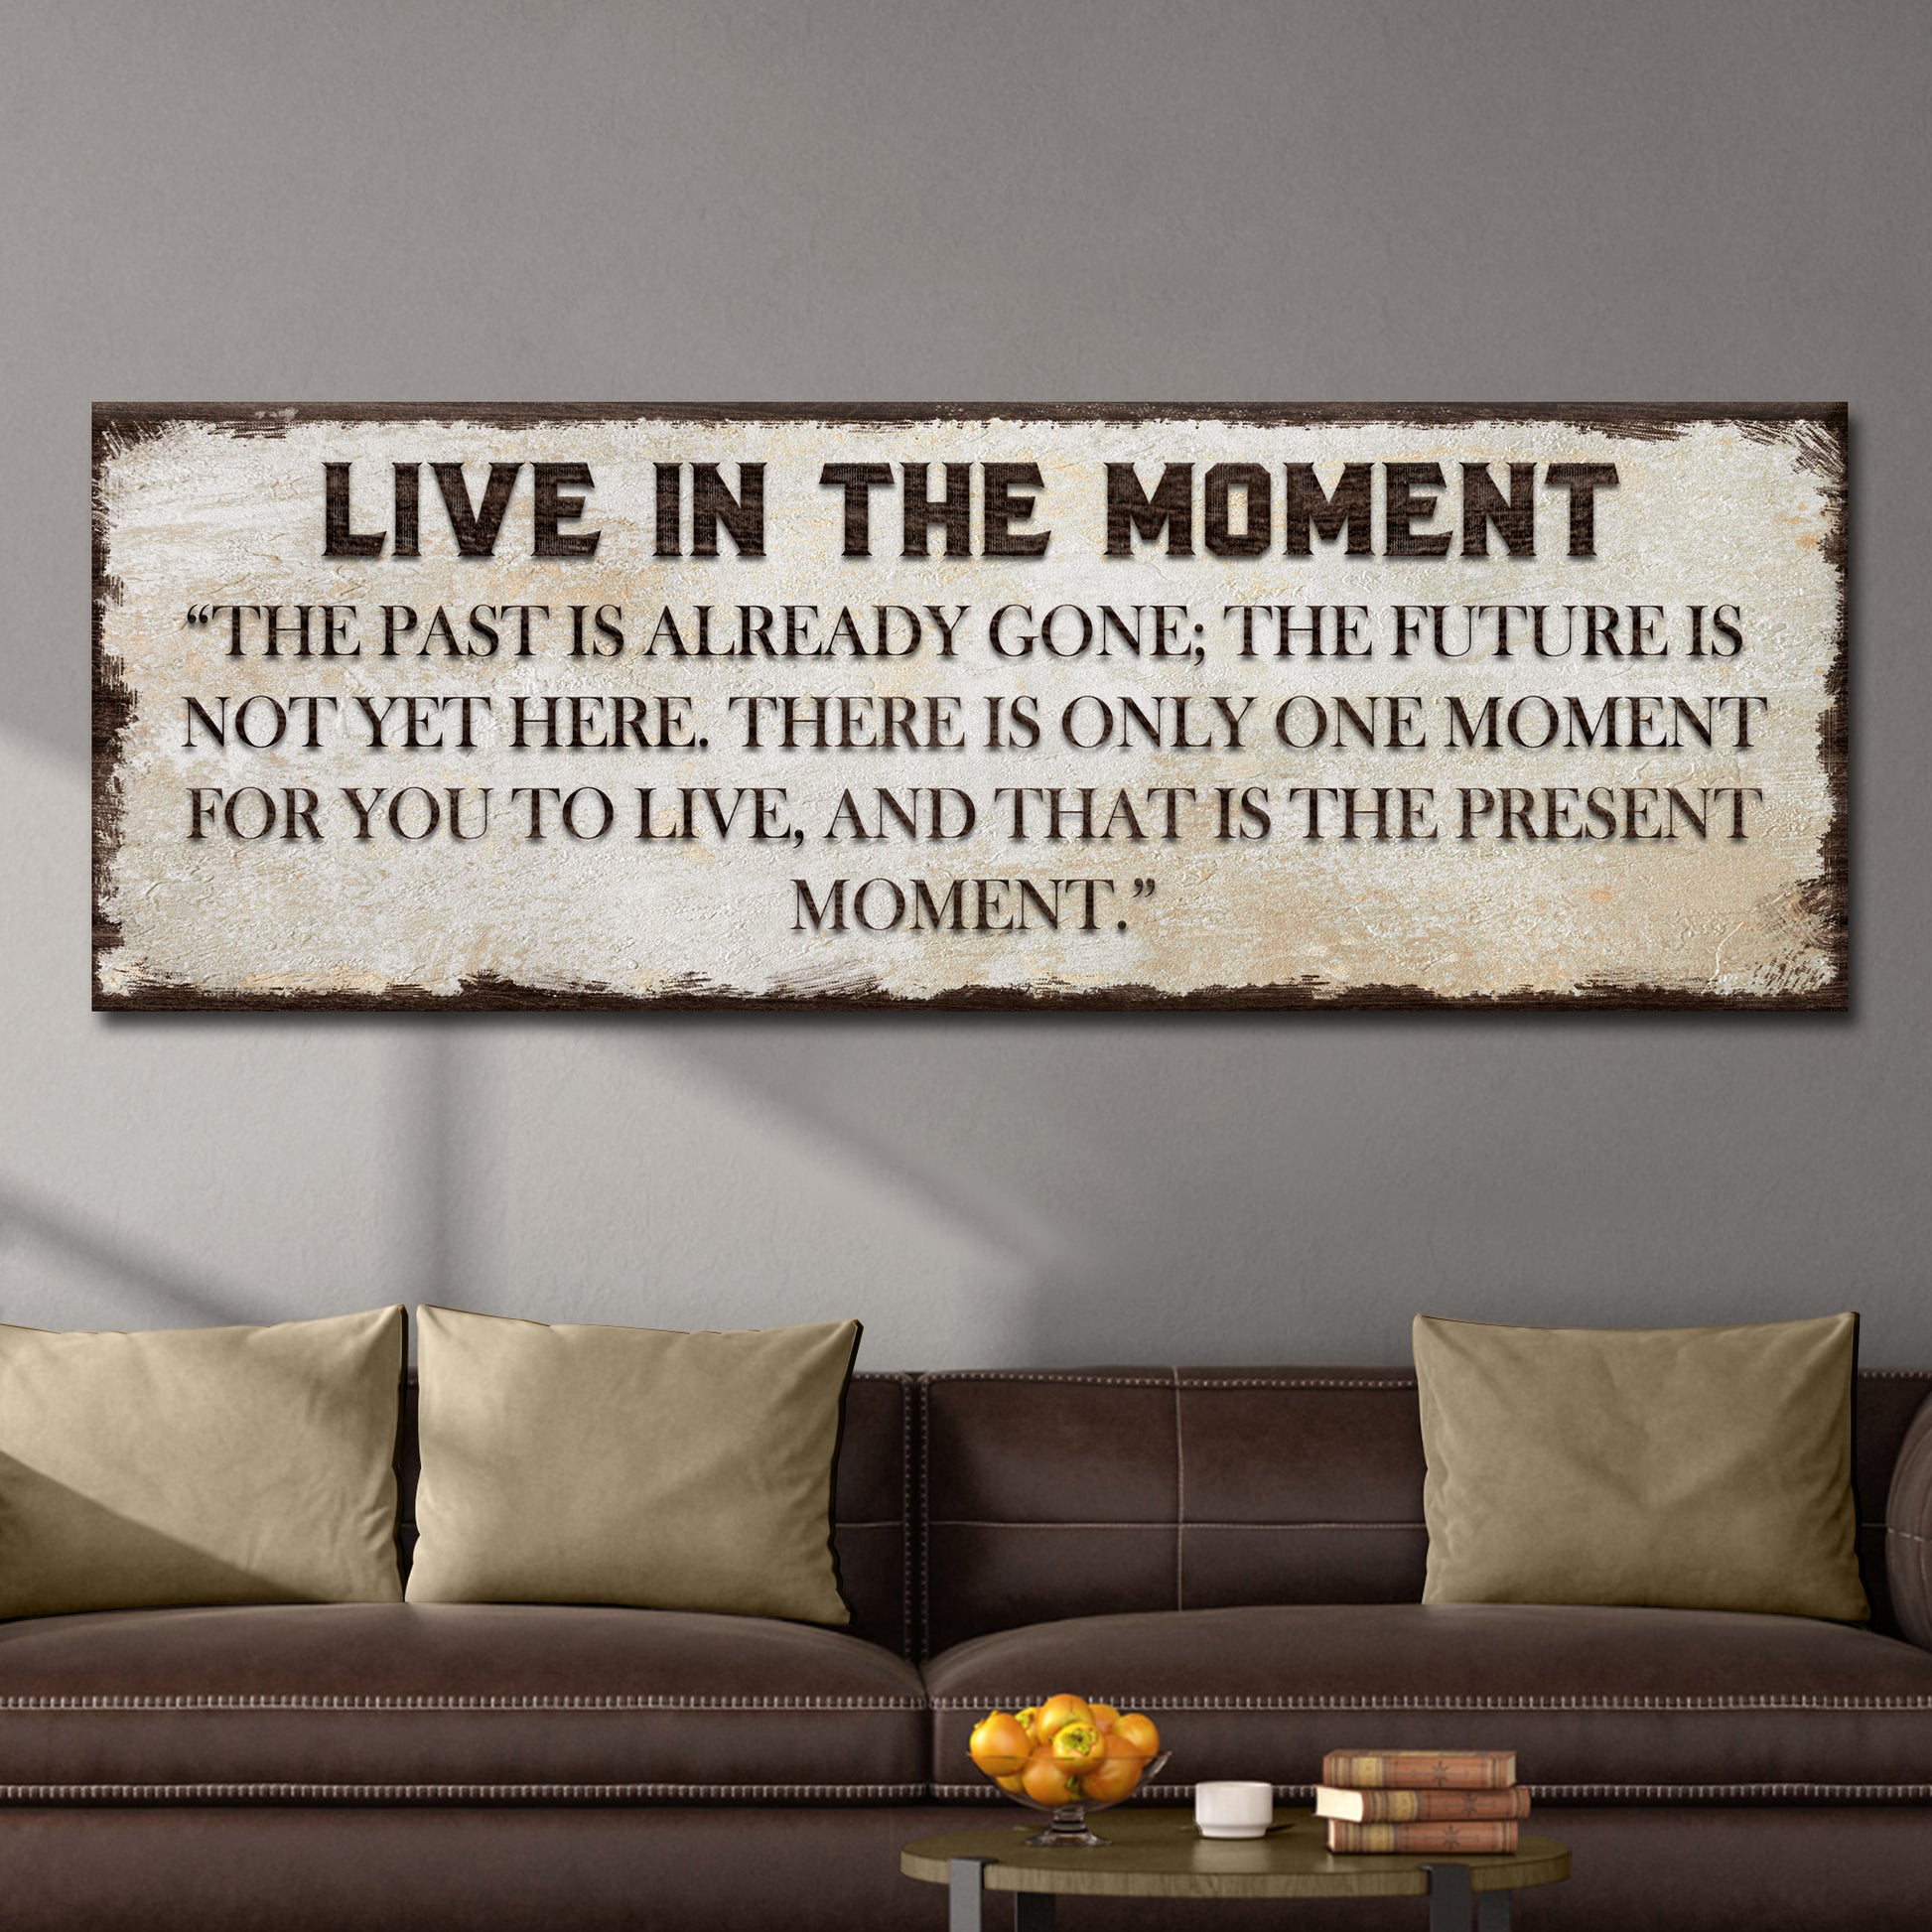 Live In The Moment Sign - Image by Tailored Canvases